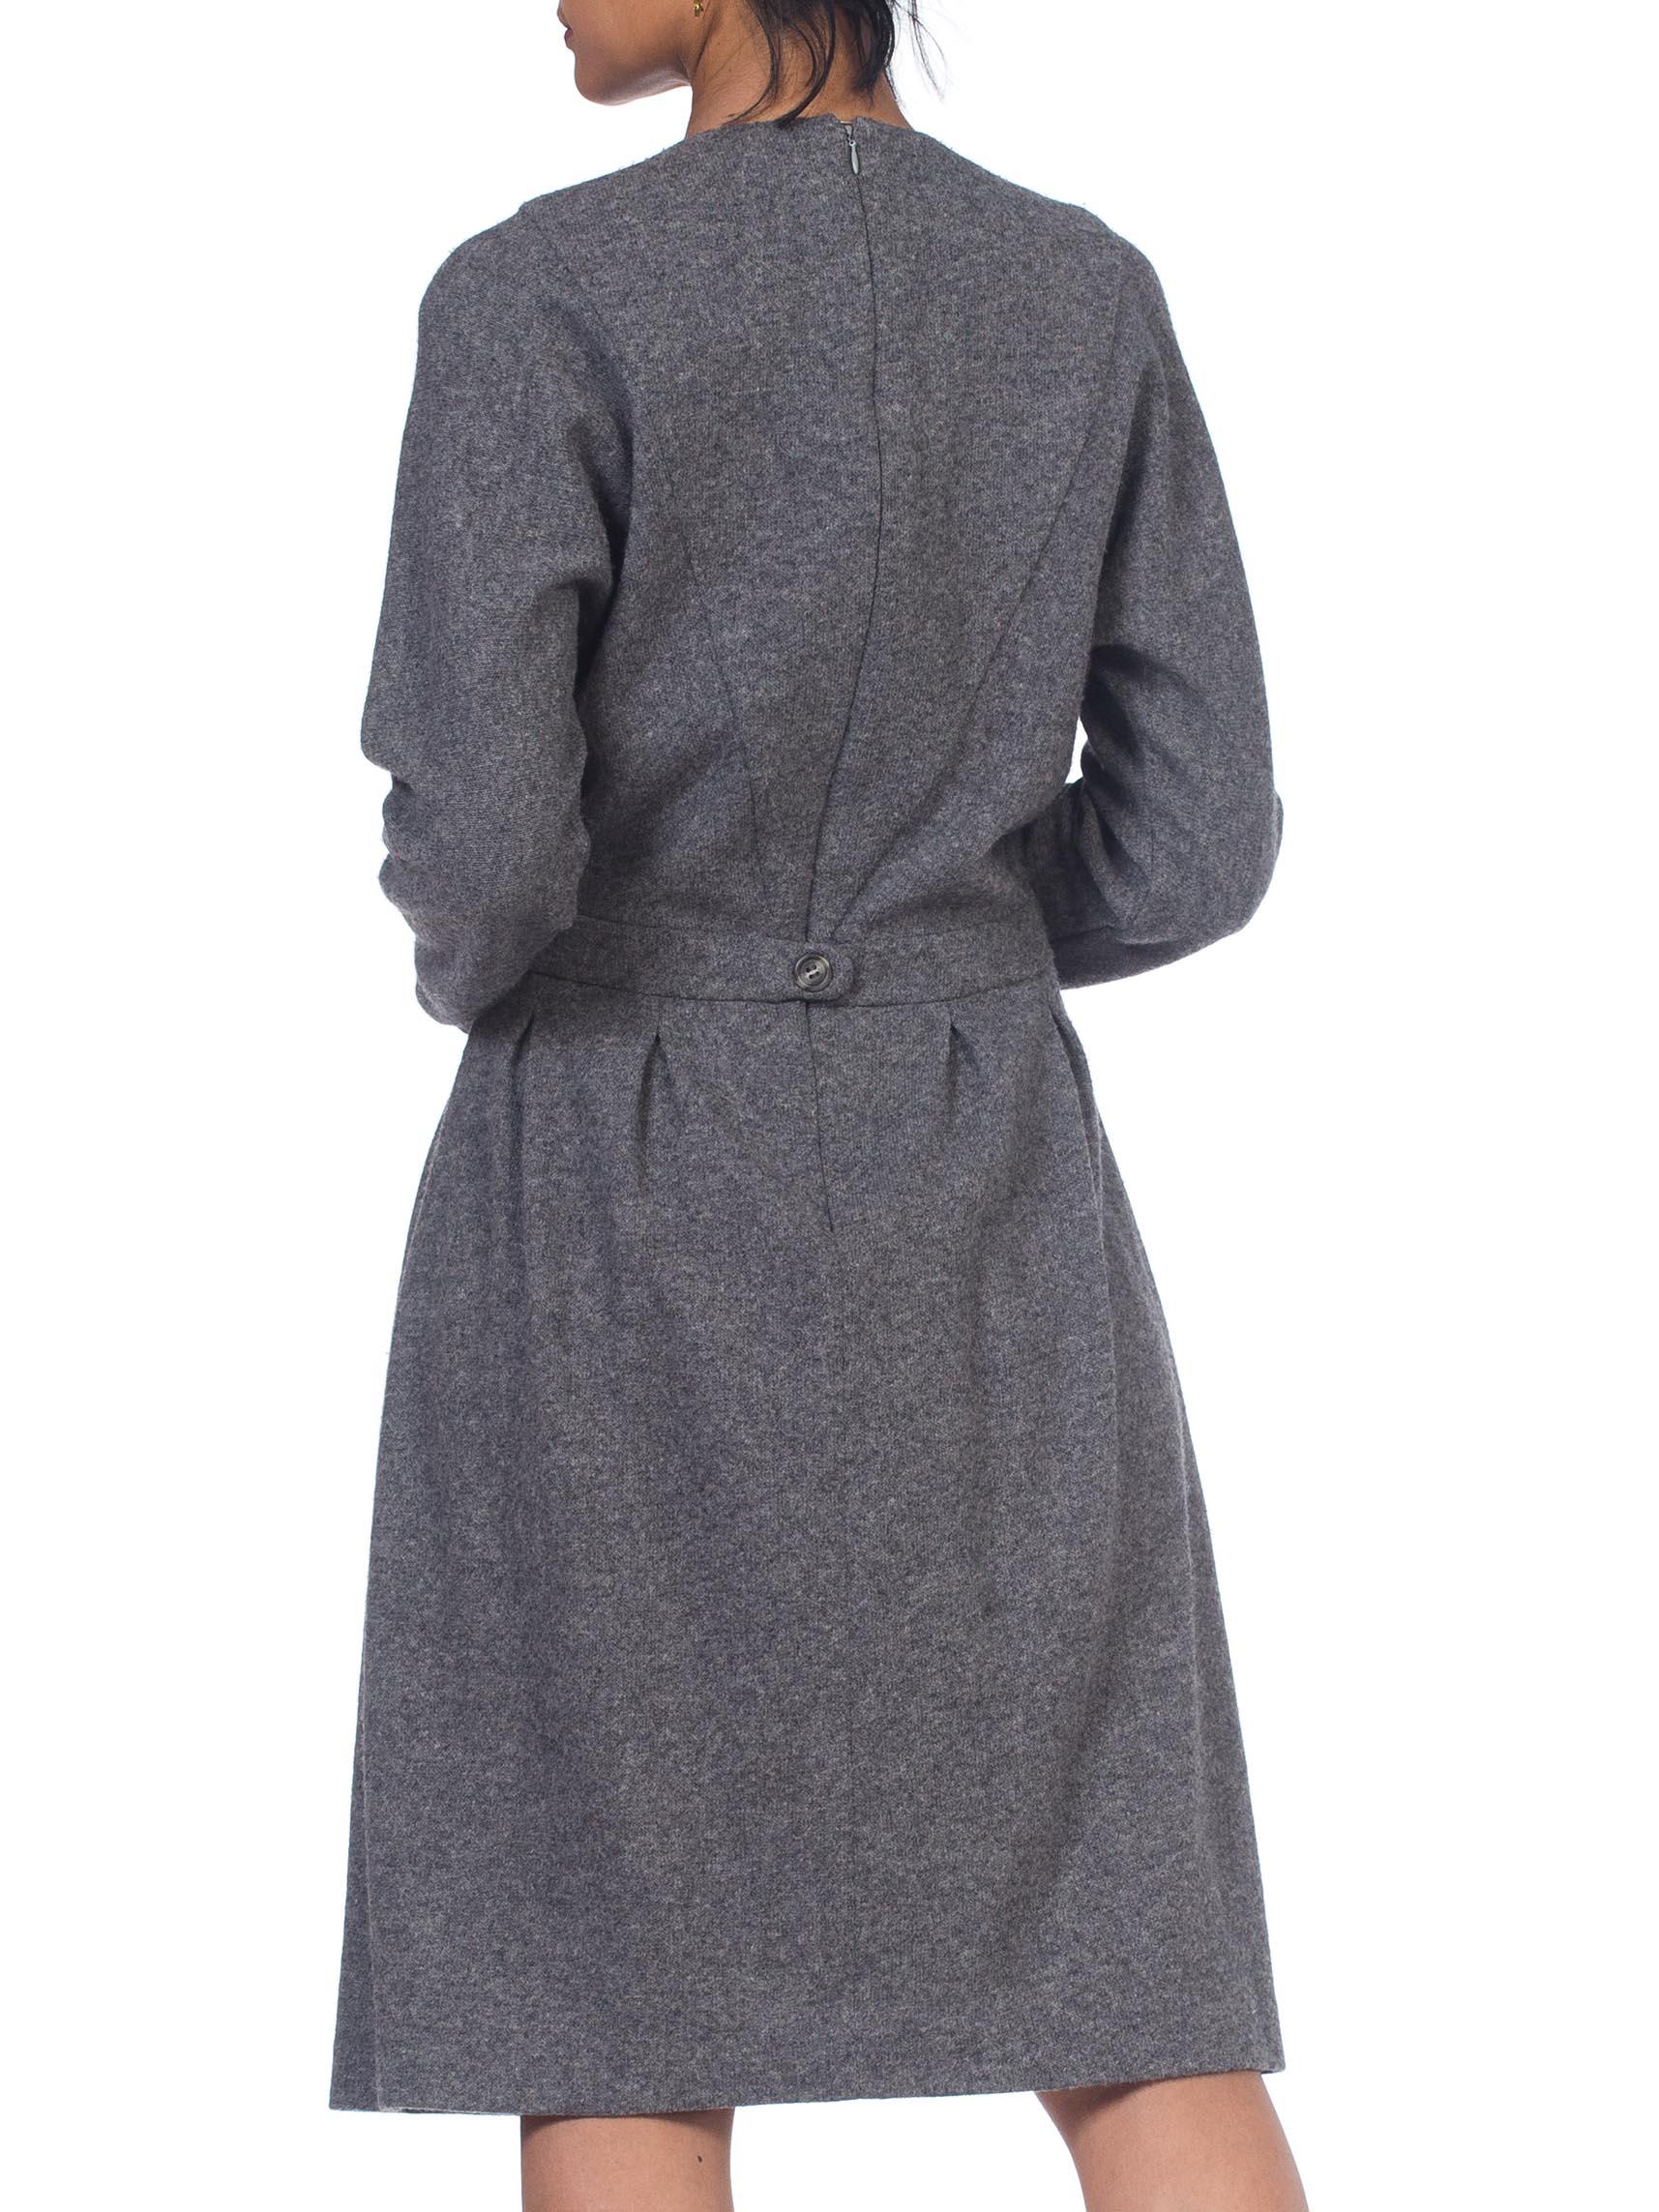 Gray 1980S GEOFFREY BEENE Grey Wool Knit Long Sleeve Sweater Dress With Partial Silk For Sale